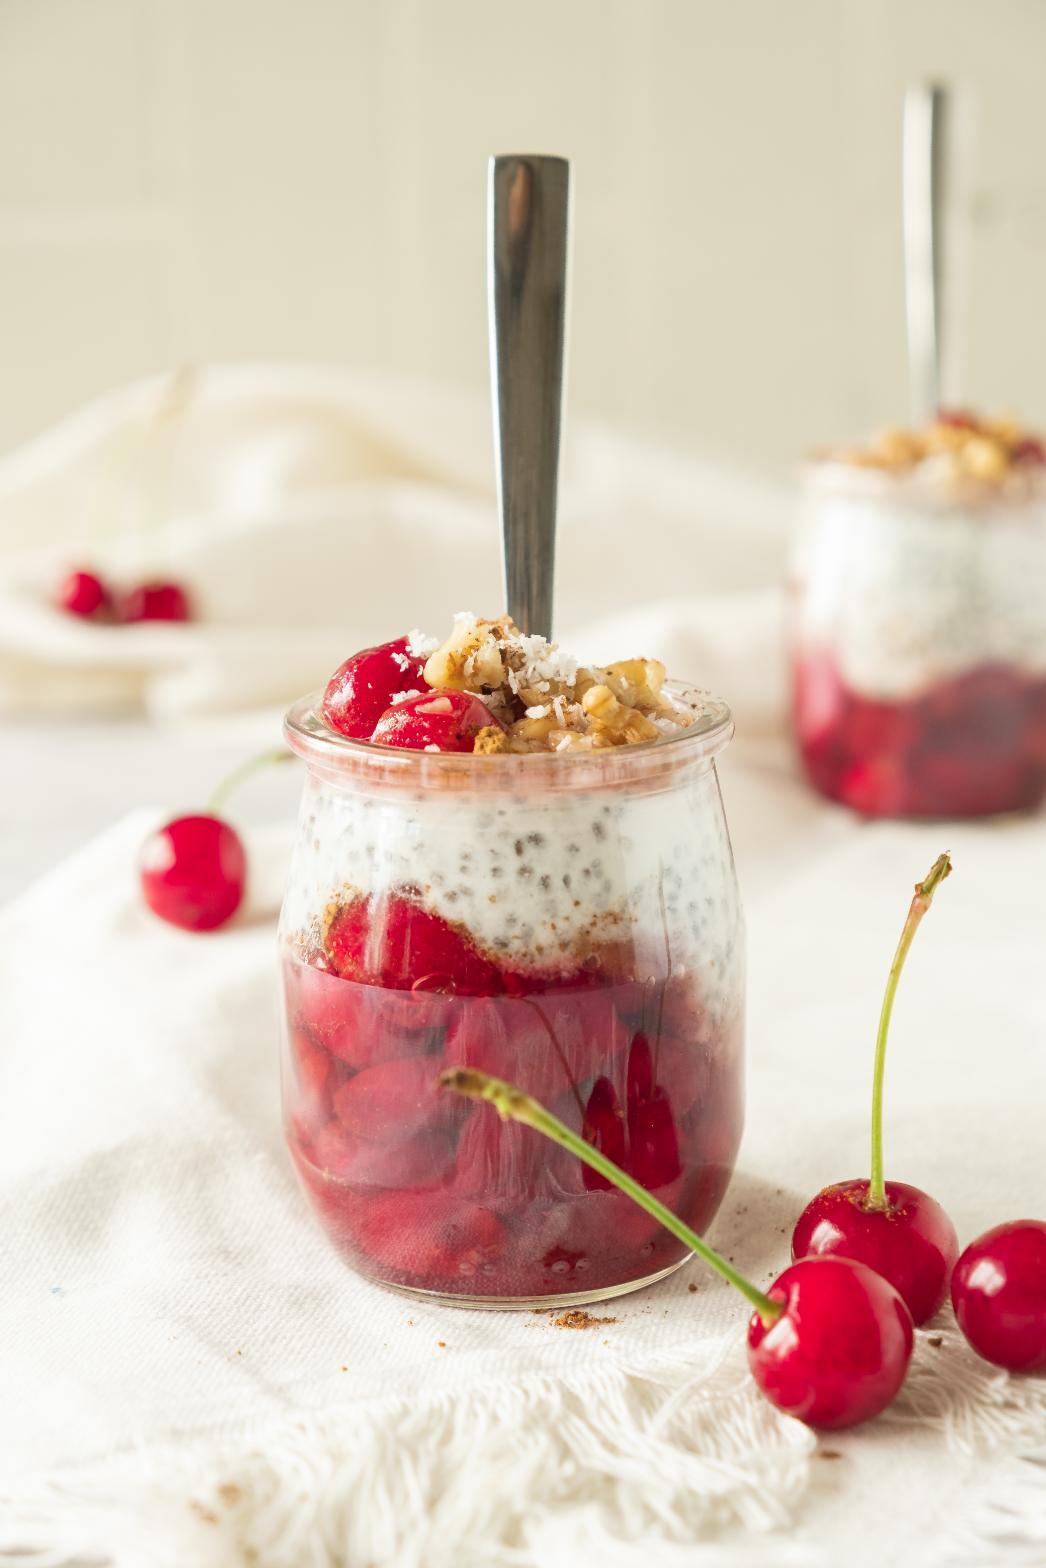 A jar of layered dessert with ruby-red cherries, creamy yogurt, and crunchy walnuts over cherry chia pudding, served with a spoon.